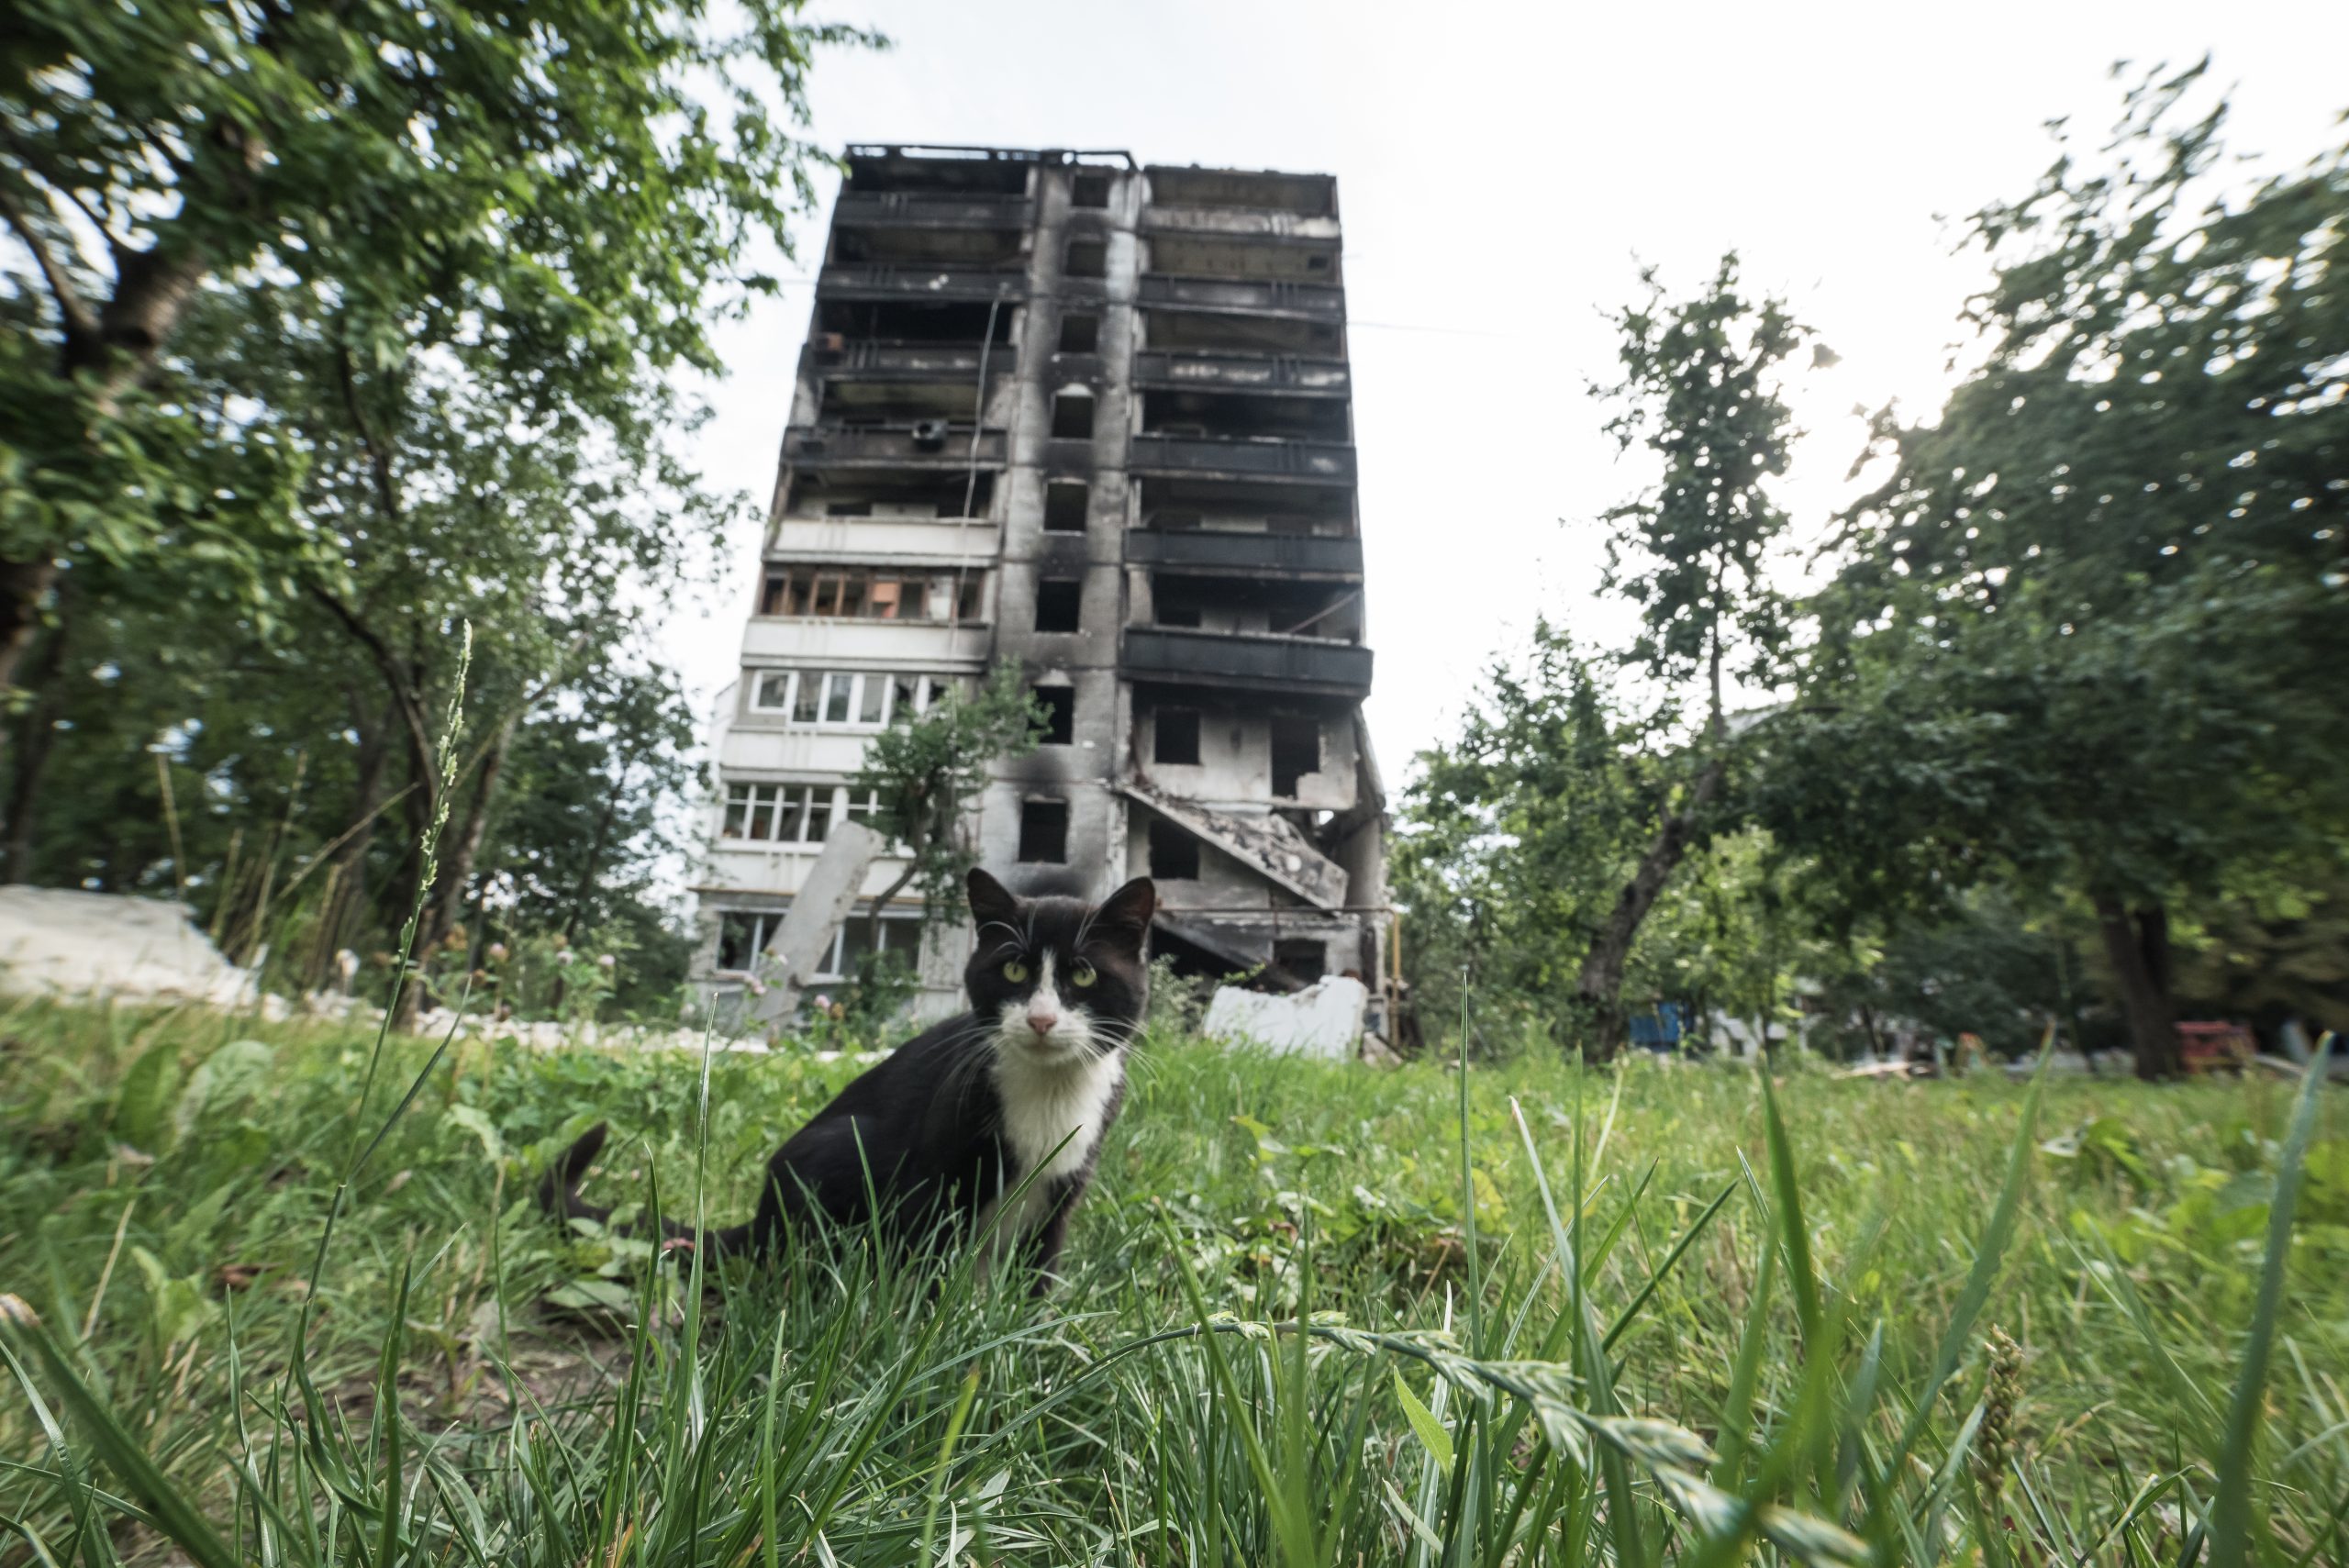 Kharkiv. A cat near a destroyed building at North Saltivka. There are more cats than people living there. Photo was taken on Aug 15, 2022 by Yuliia Hush.